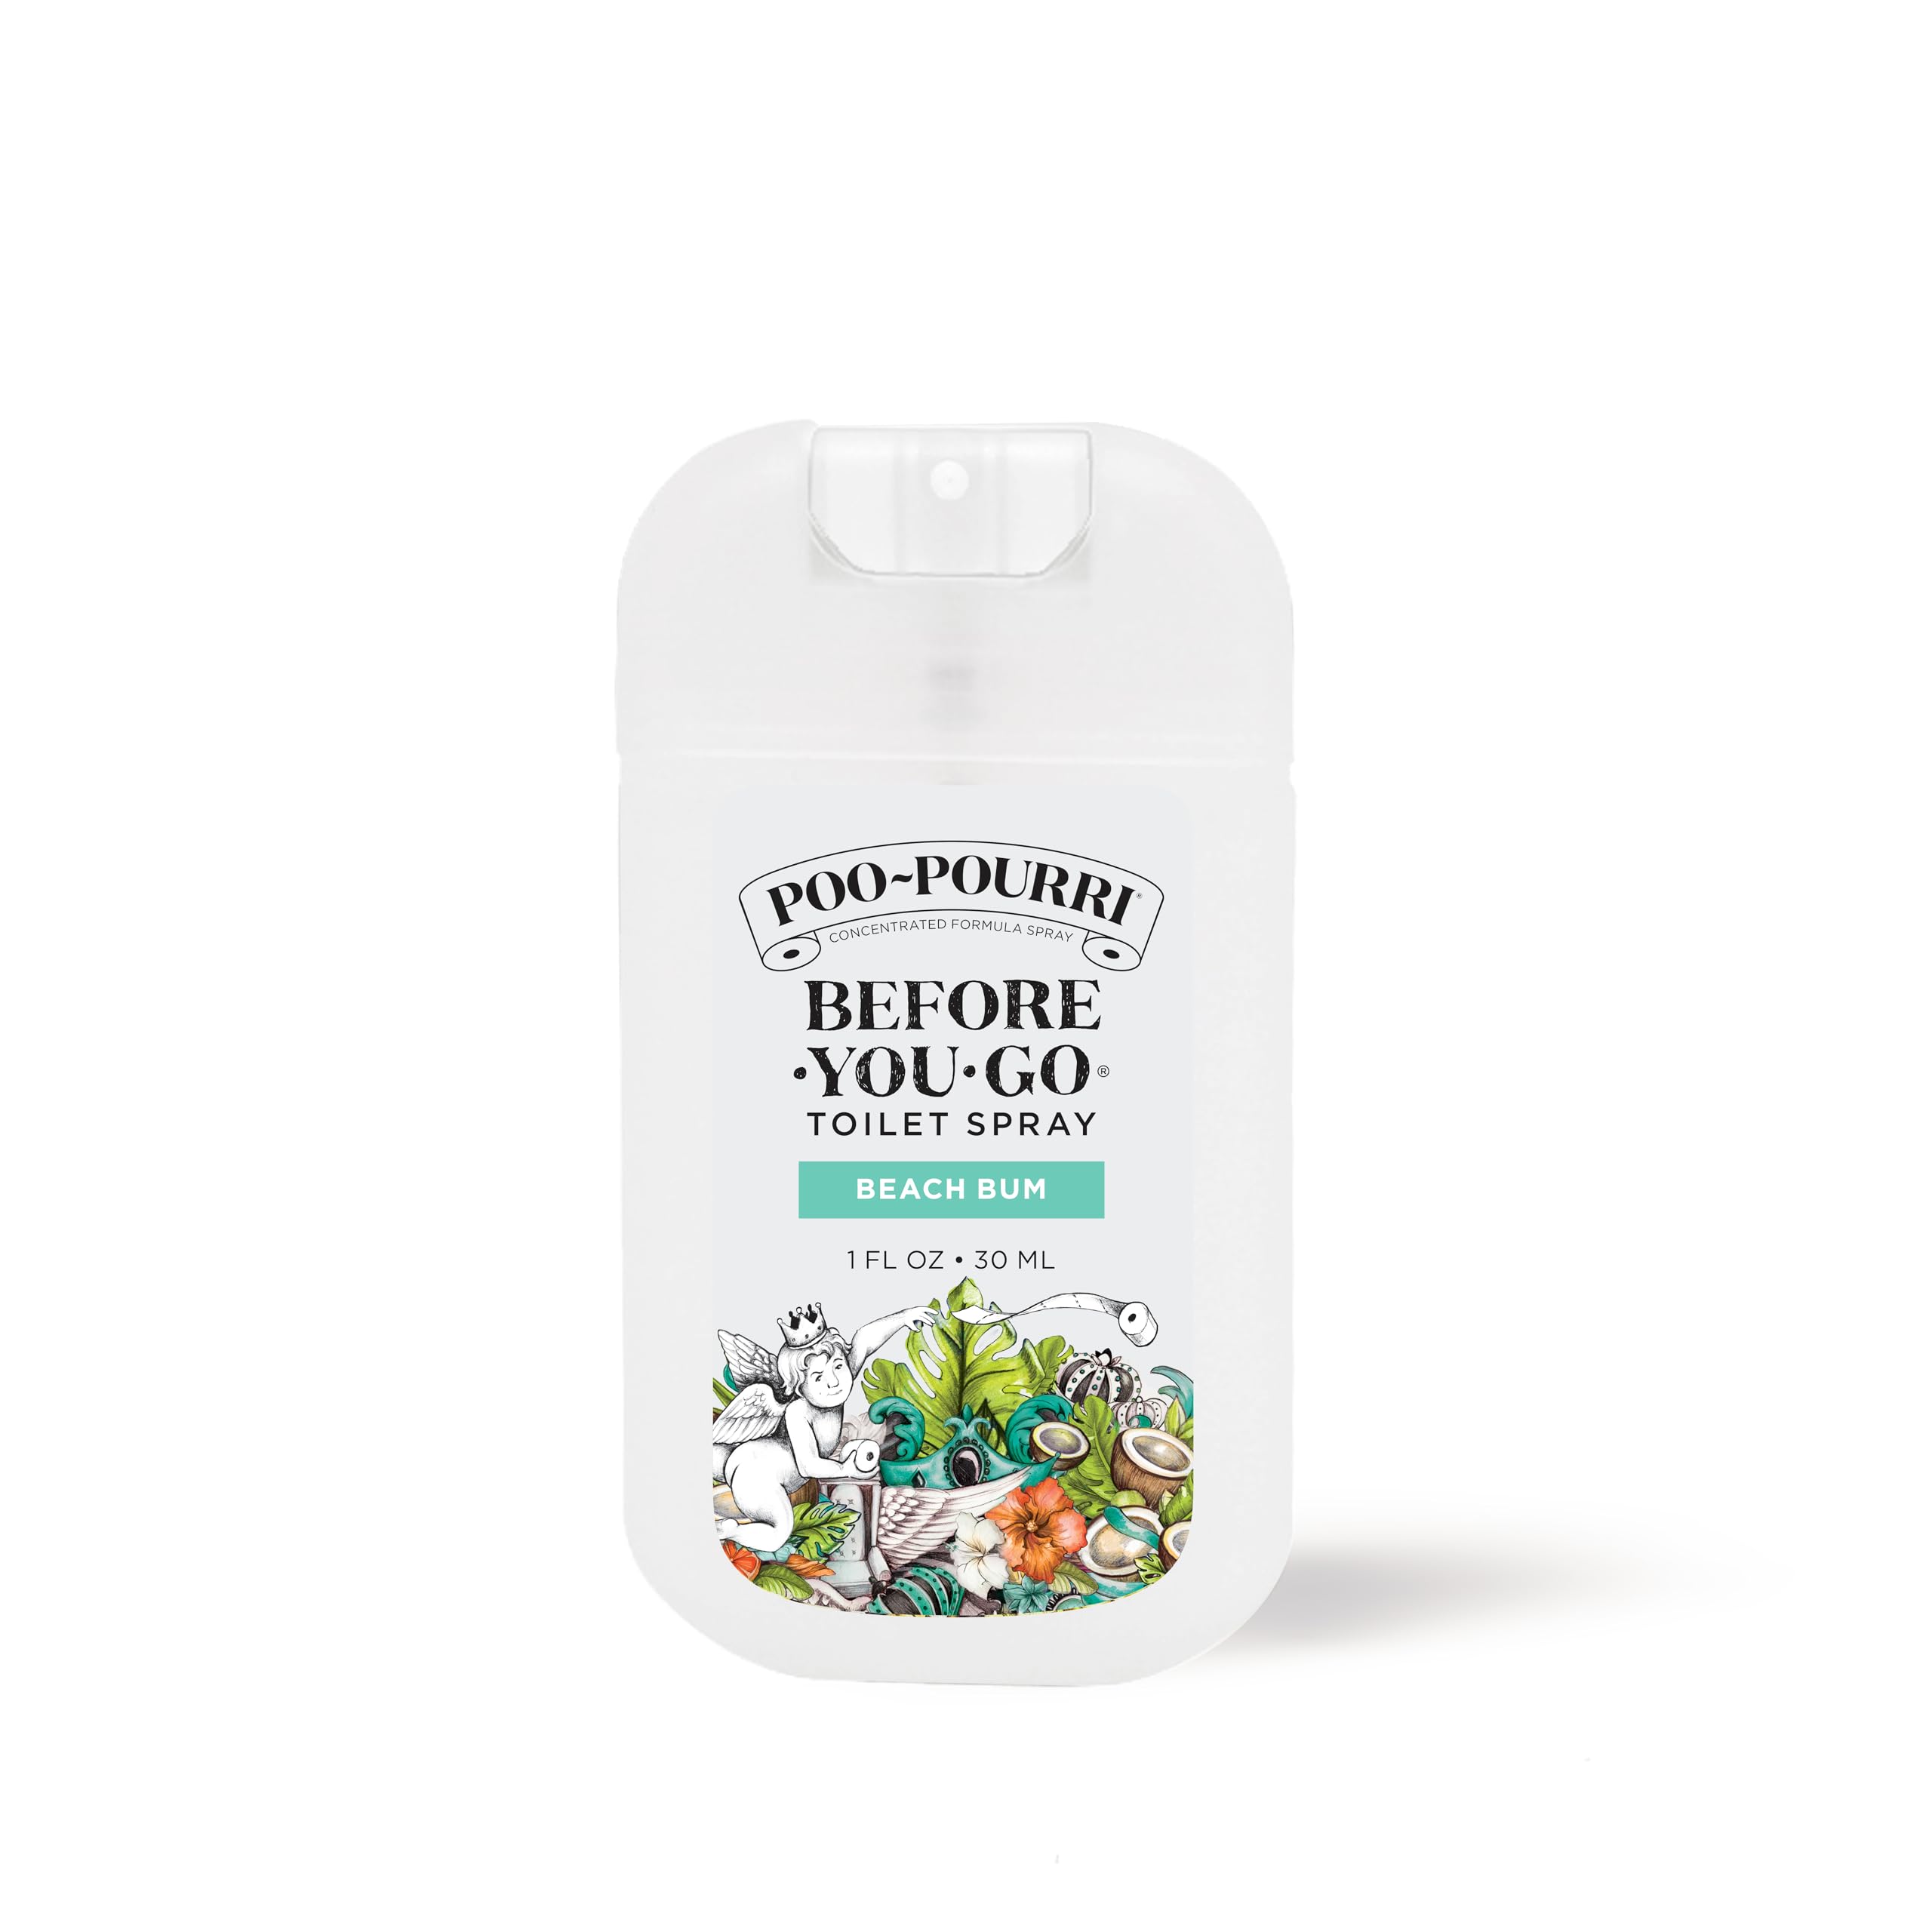 Poo-Pourri Before-You-Go Toilet Spray, Beach Bum, 1 Fl Oz Pocket Travel Size - Coconut, Orchid and Toasted Praline